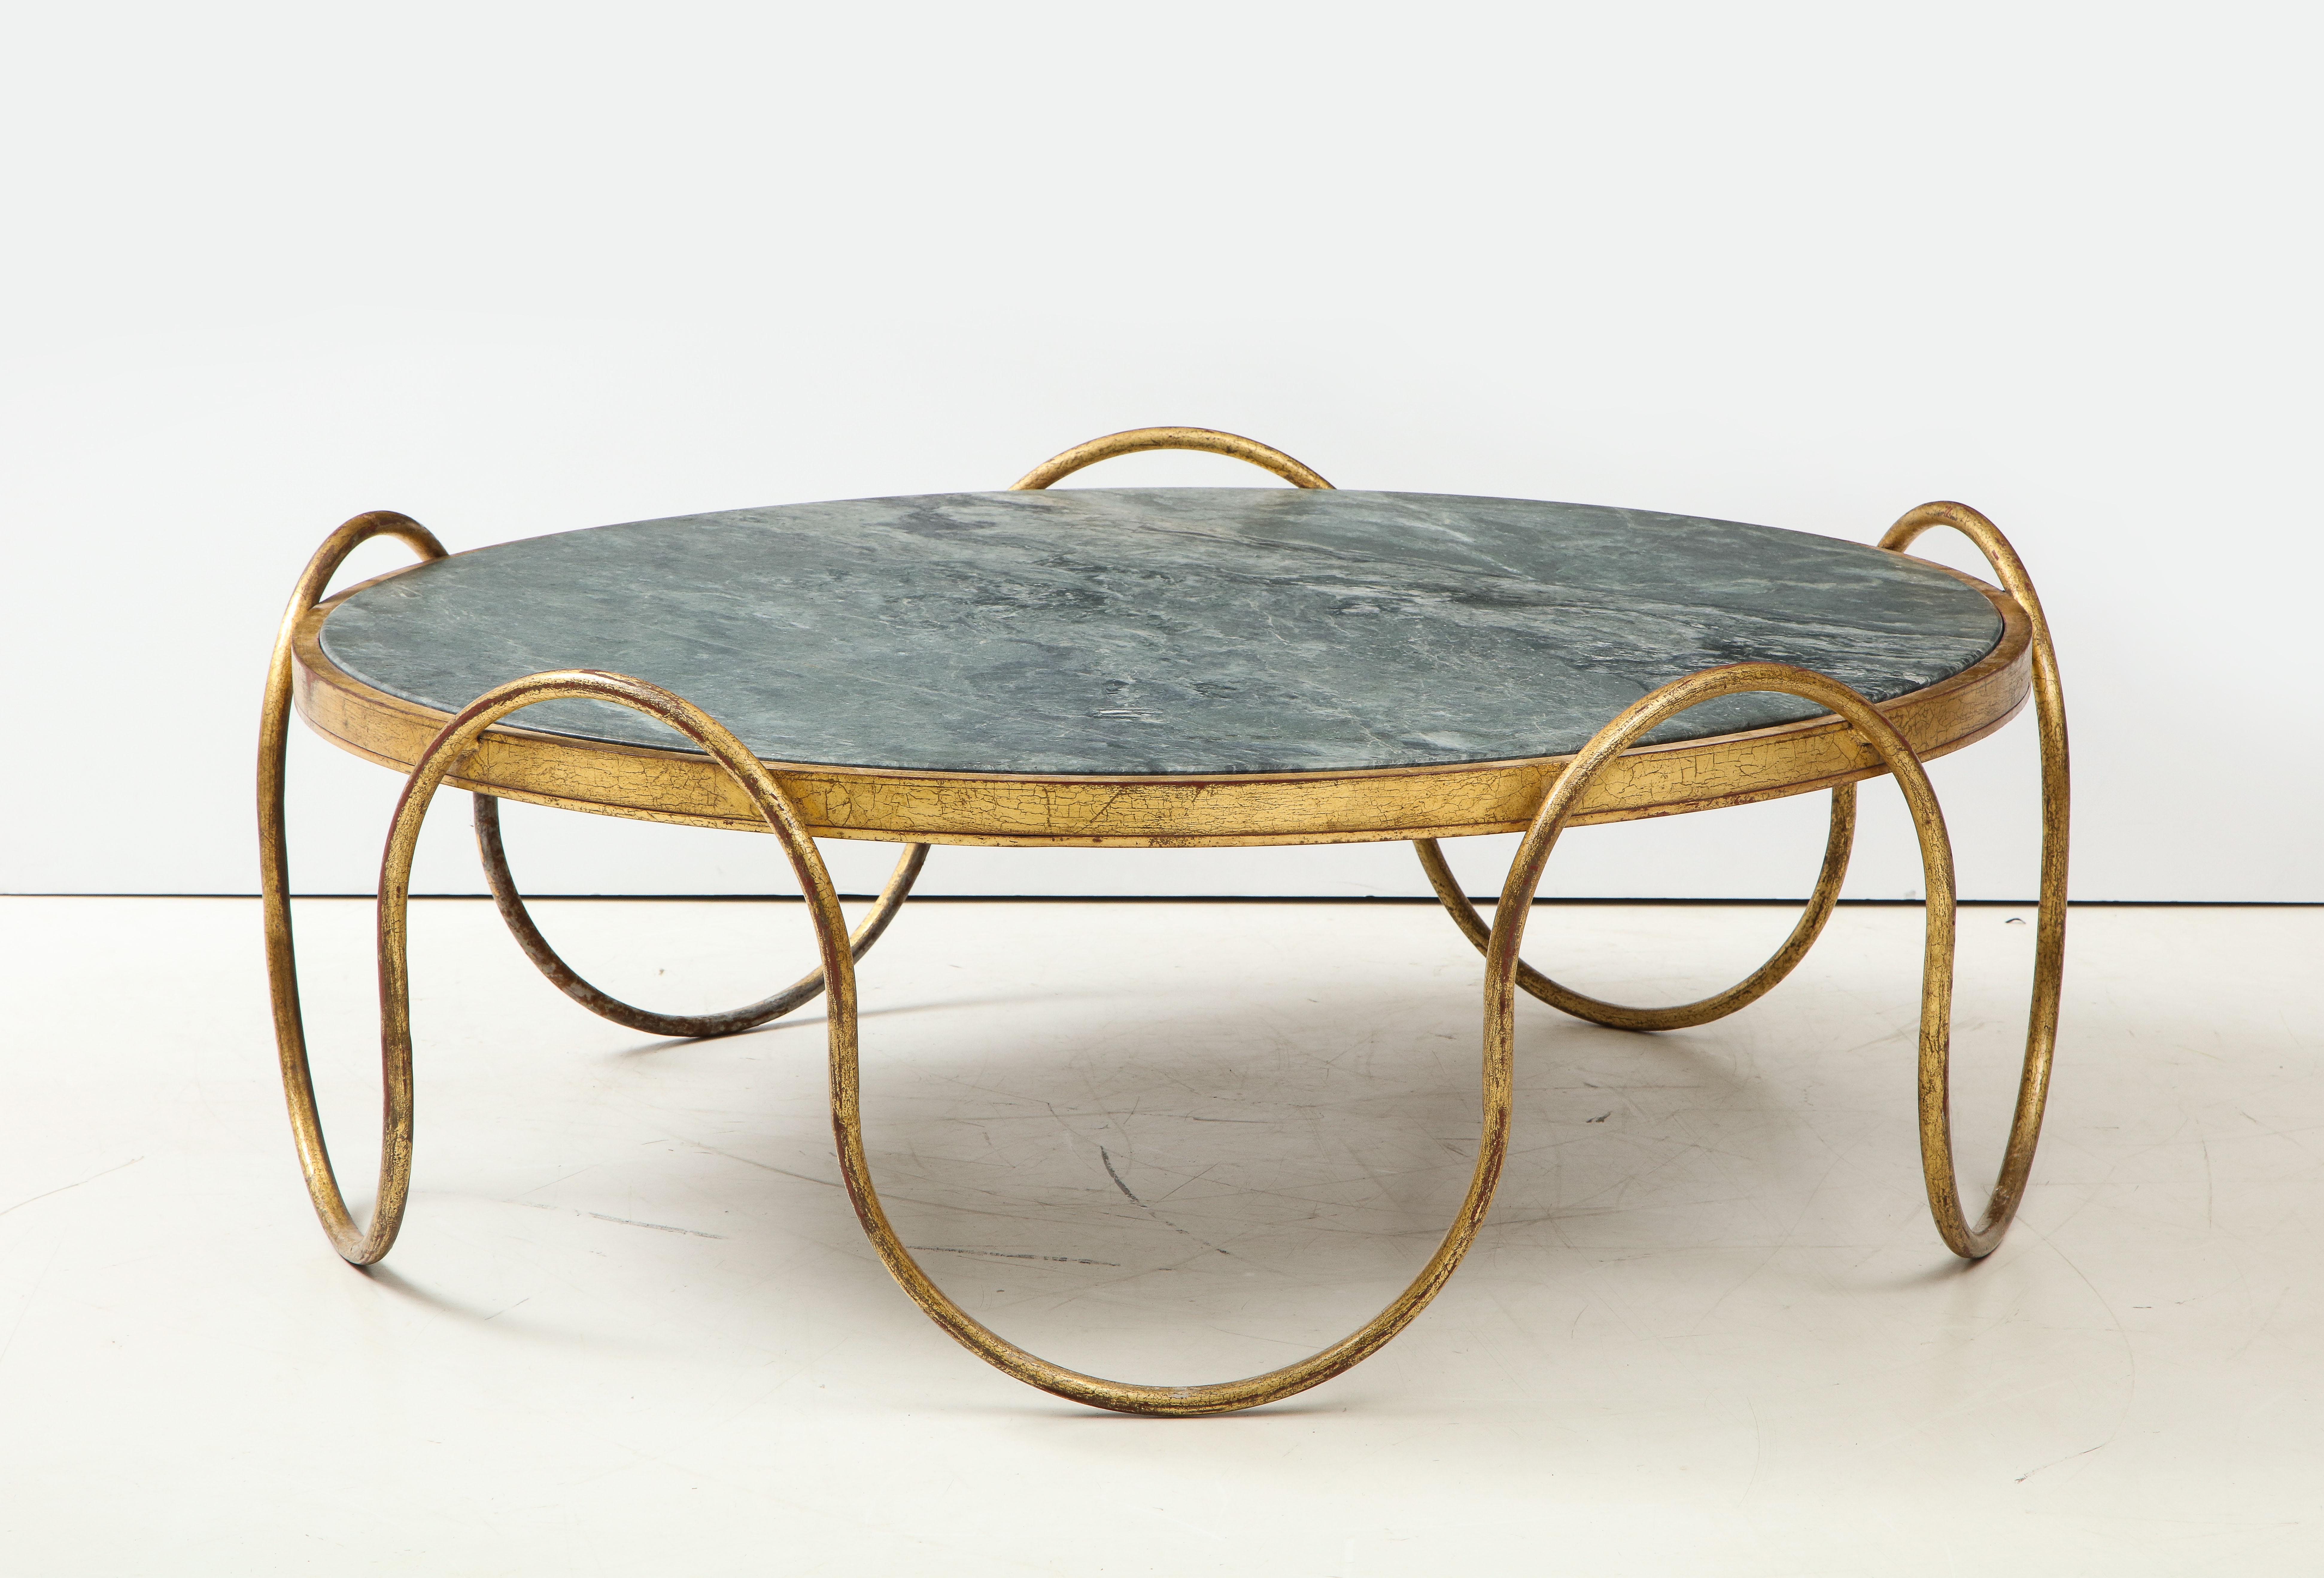 Ondulation coffee table.
The sinusoidal wave frame in gilded iron has a polished green leathered finish stone top.
The height to the top of the stone is 17